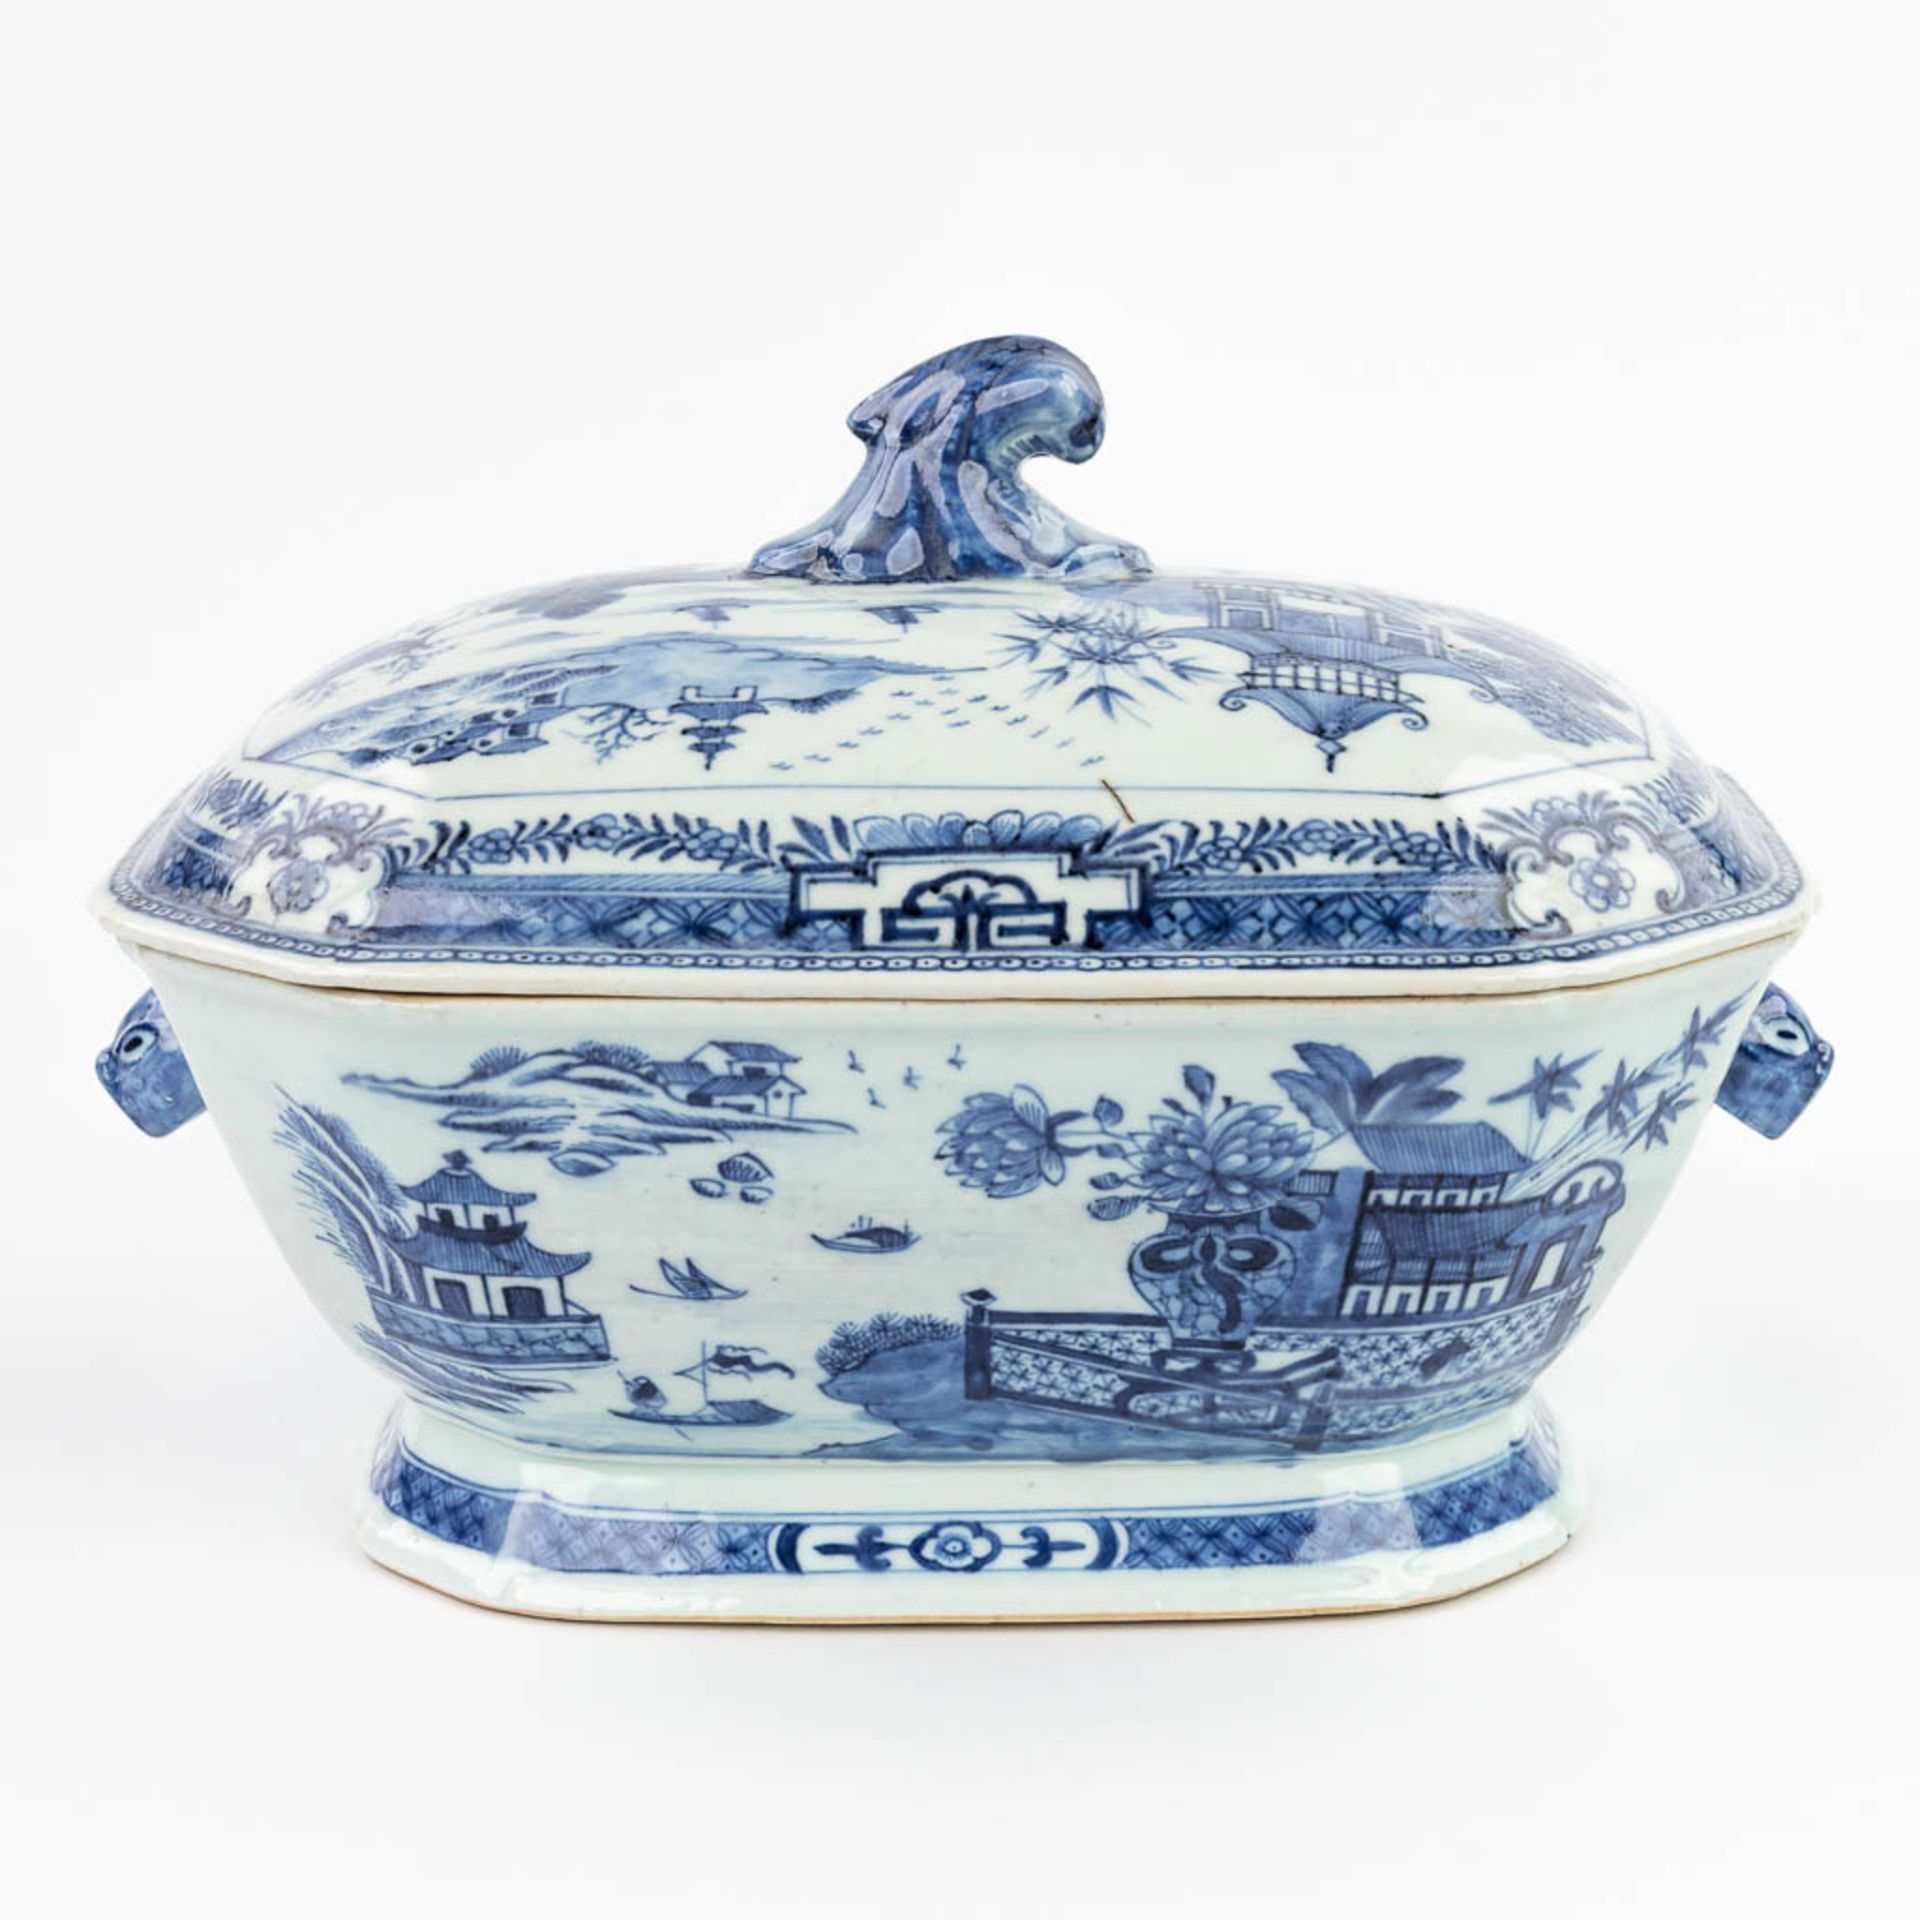 A Chinese soup tureen made of blue-white porcelain. (22 x 31 x 22 cm) - Image 12 of 15